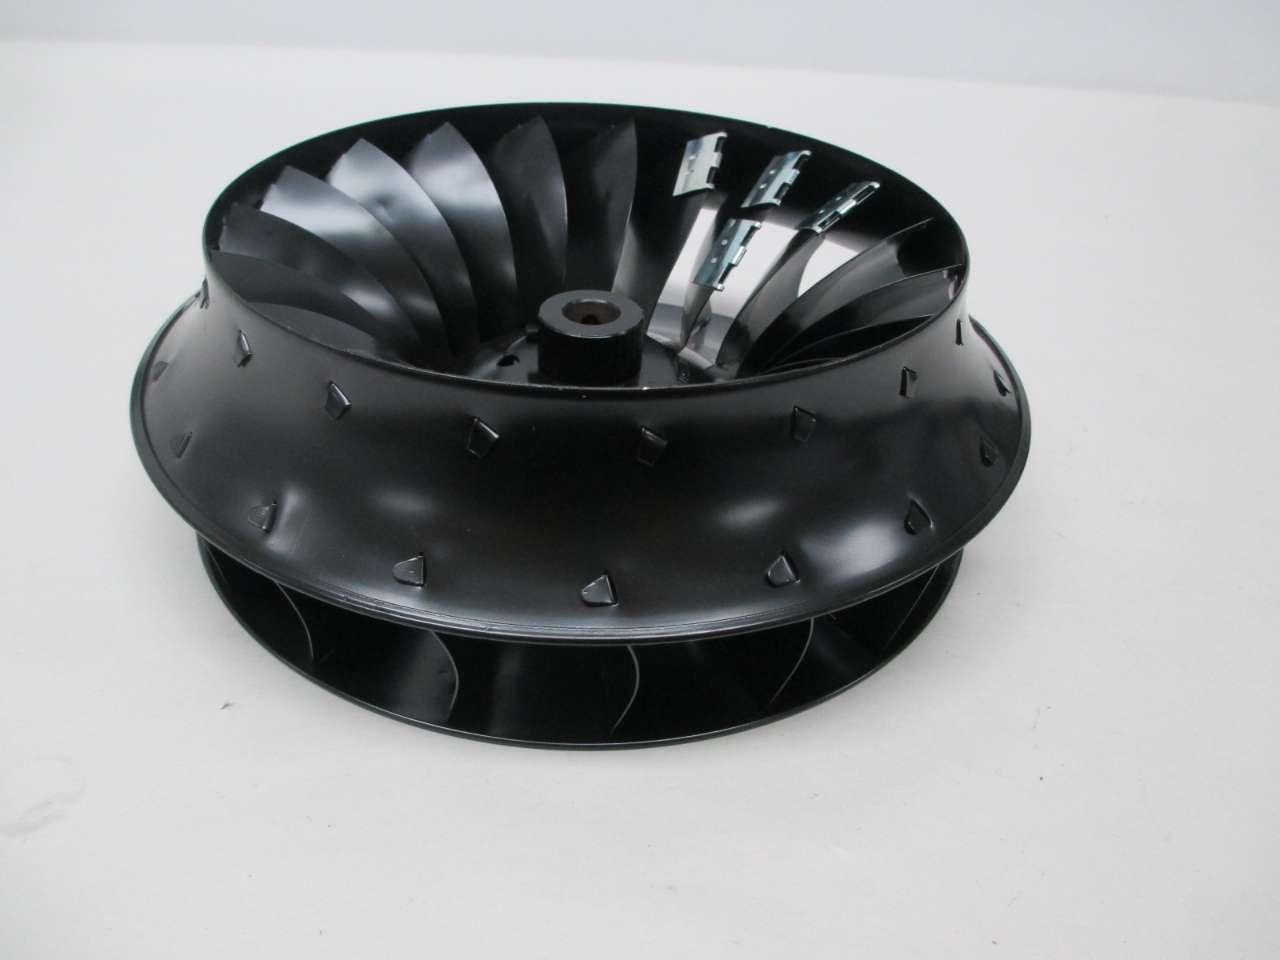 Blower Wheel for Vulcan Hobart Commercial Convection Oven 415780-3 26-1469 